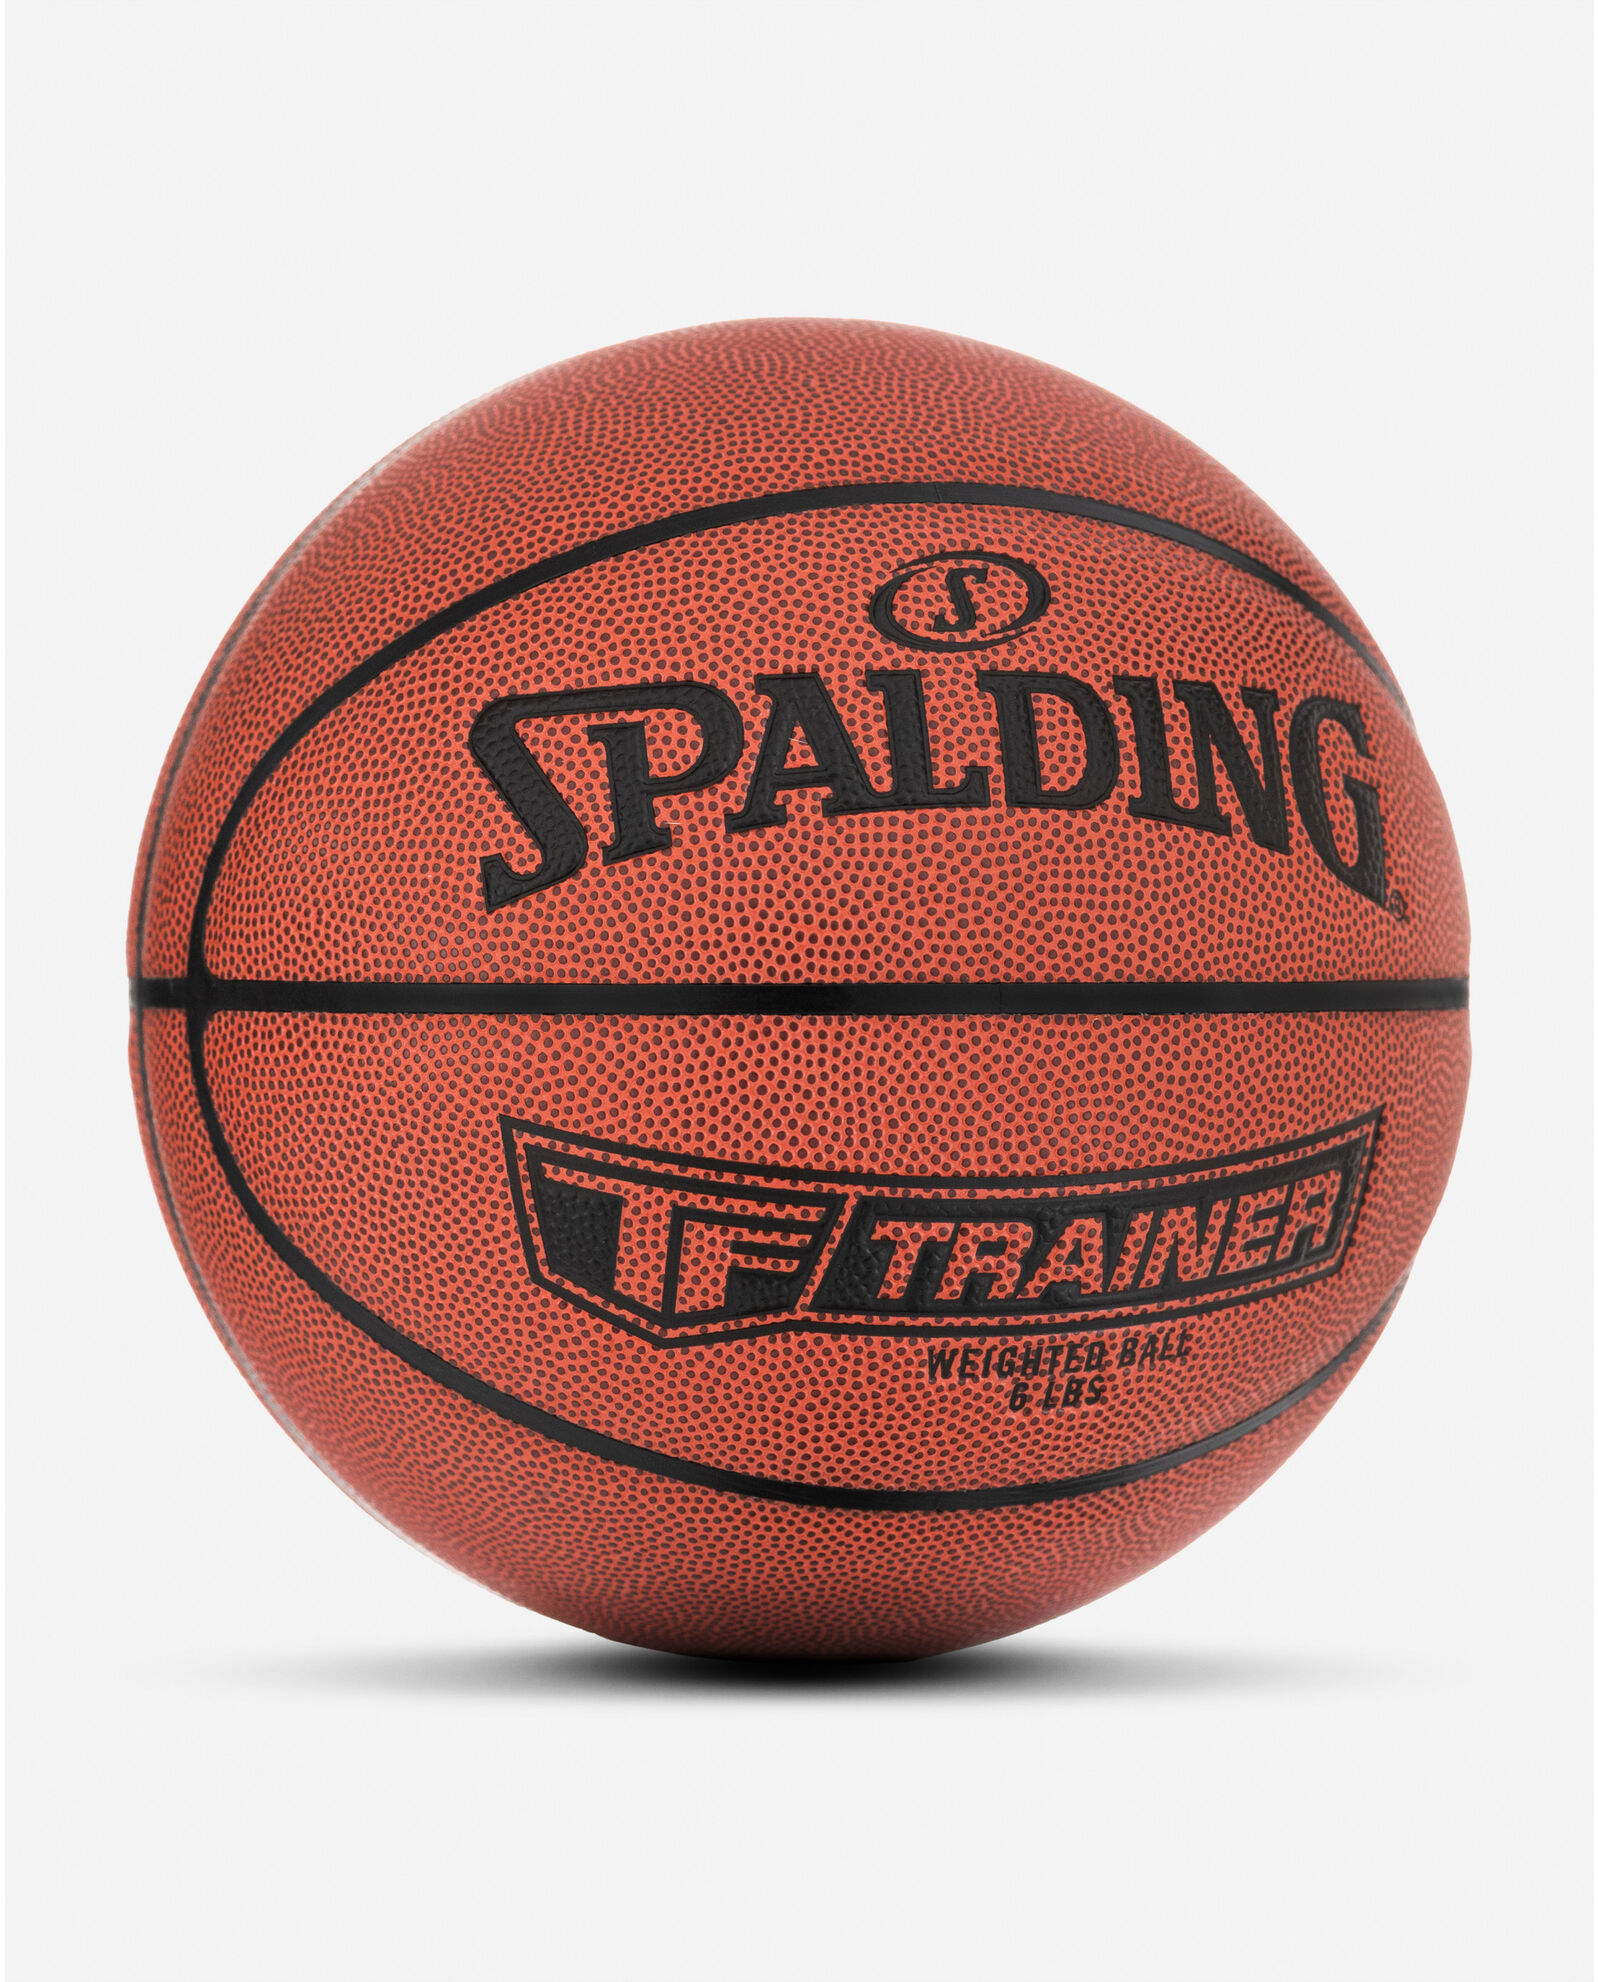 Spalding TF Trainer Weighted Indoor Basketball l Spalding.com